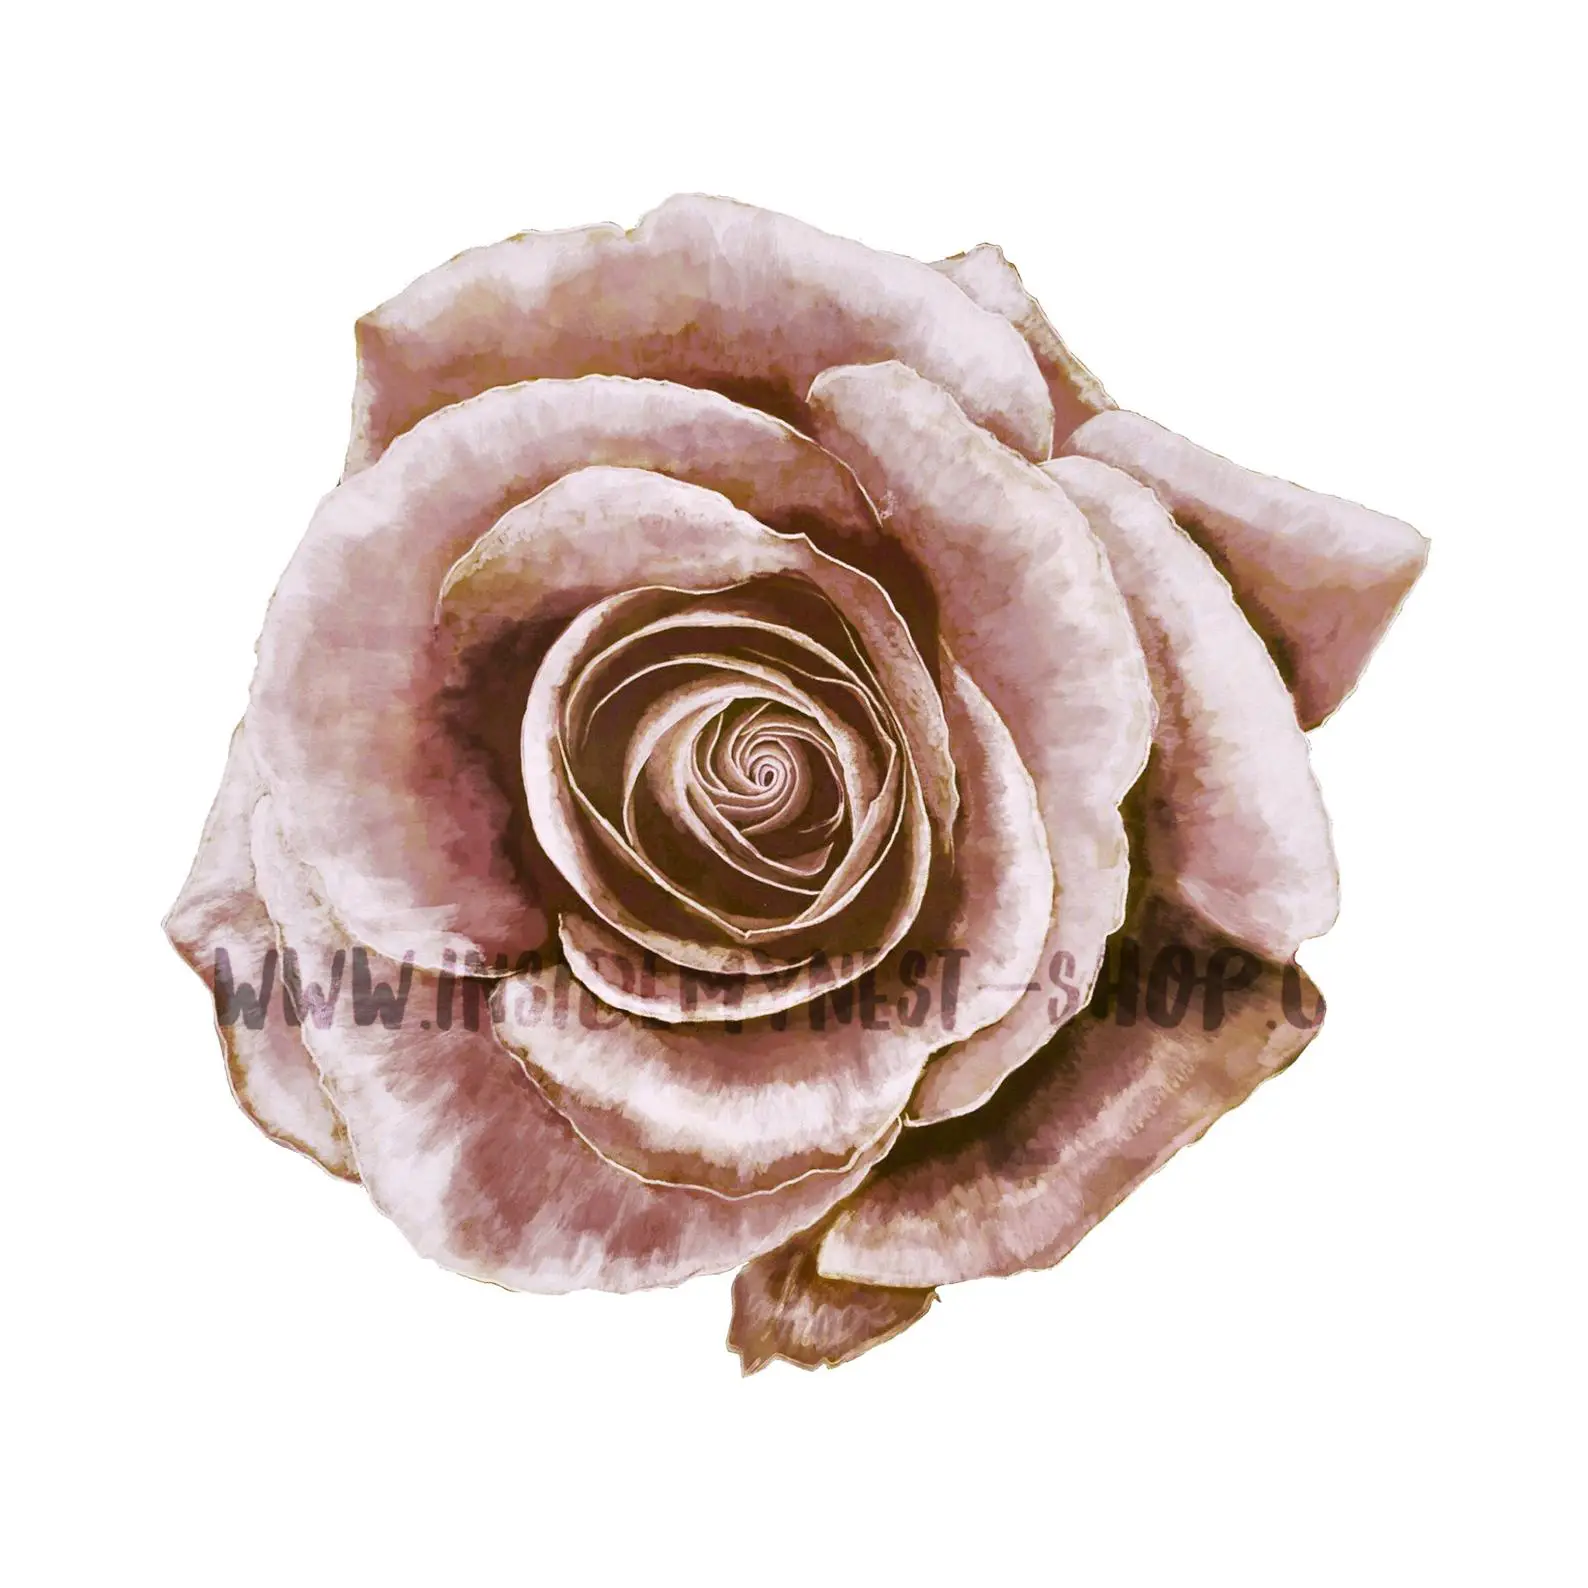 How to paint watercolour roses